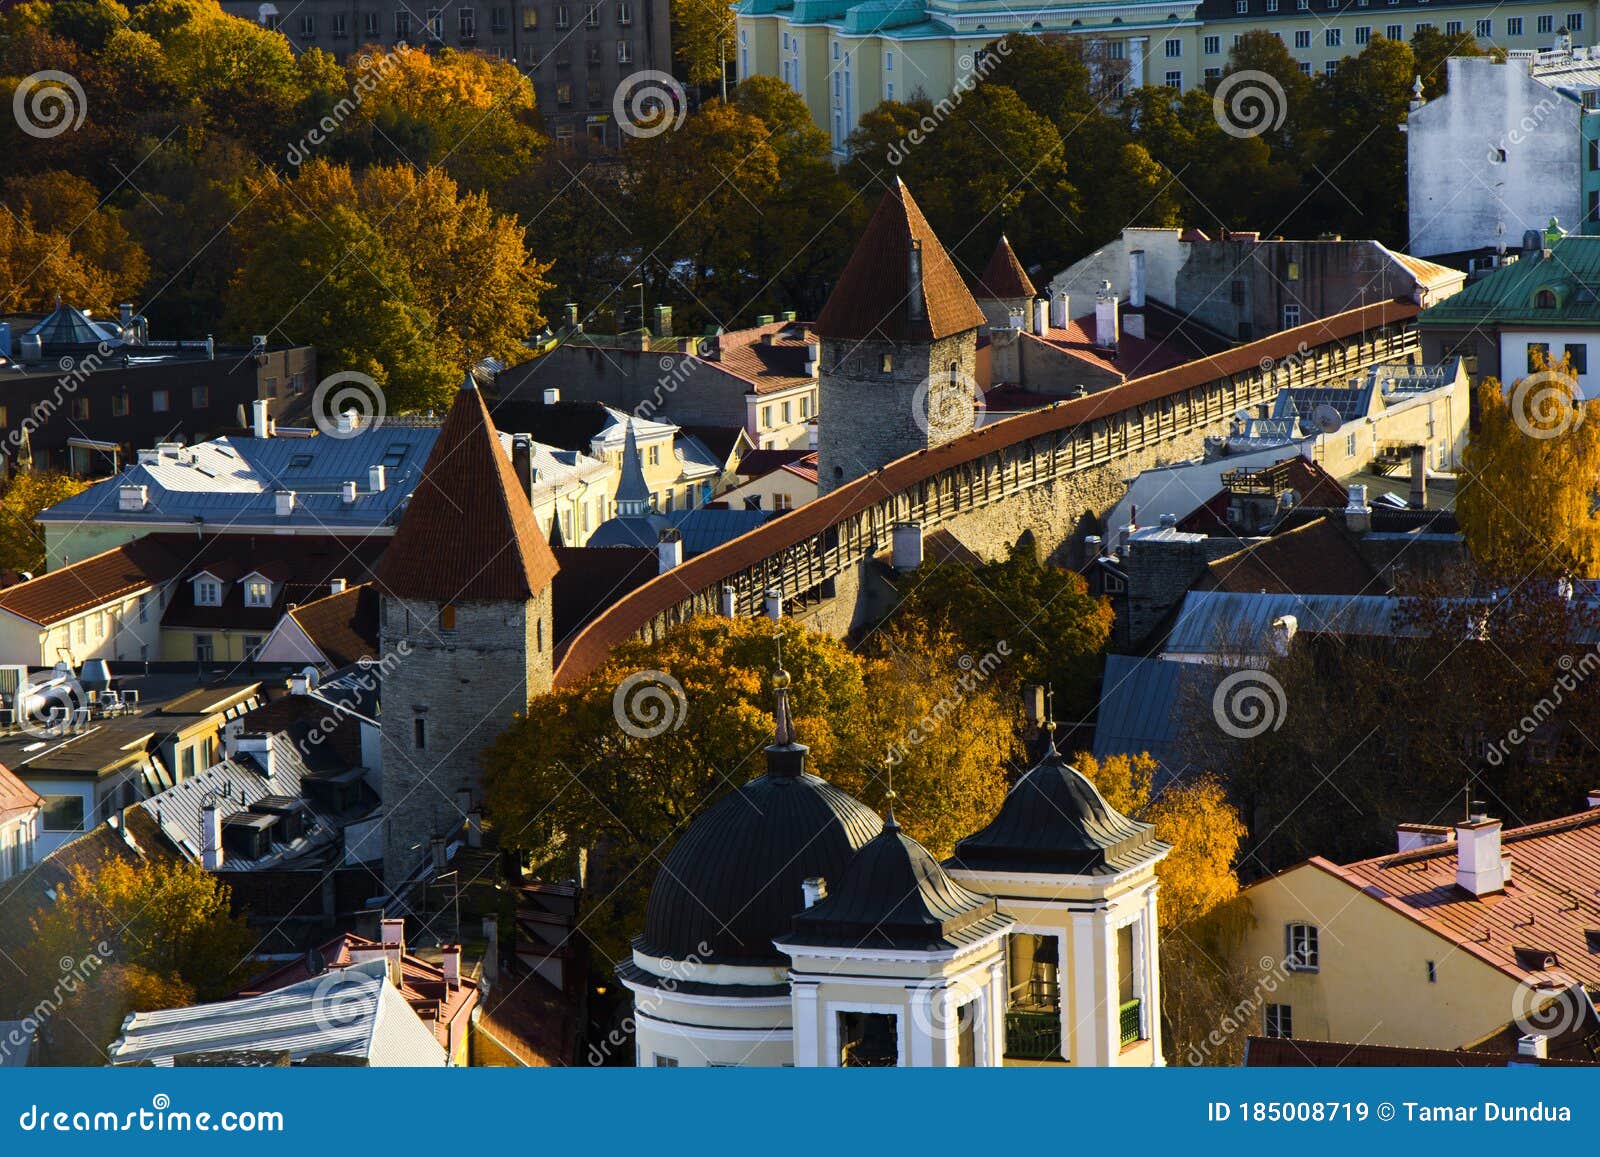 city view and city scape of tallinn castle building roofs, architecture and history landmarks, must visit place